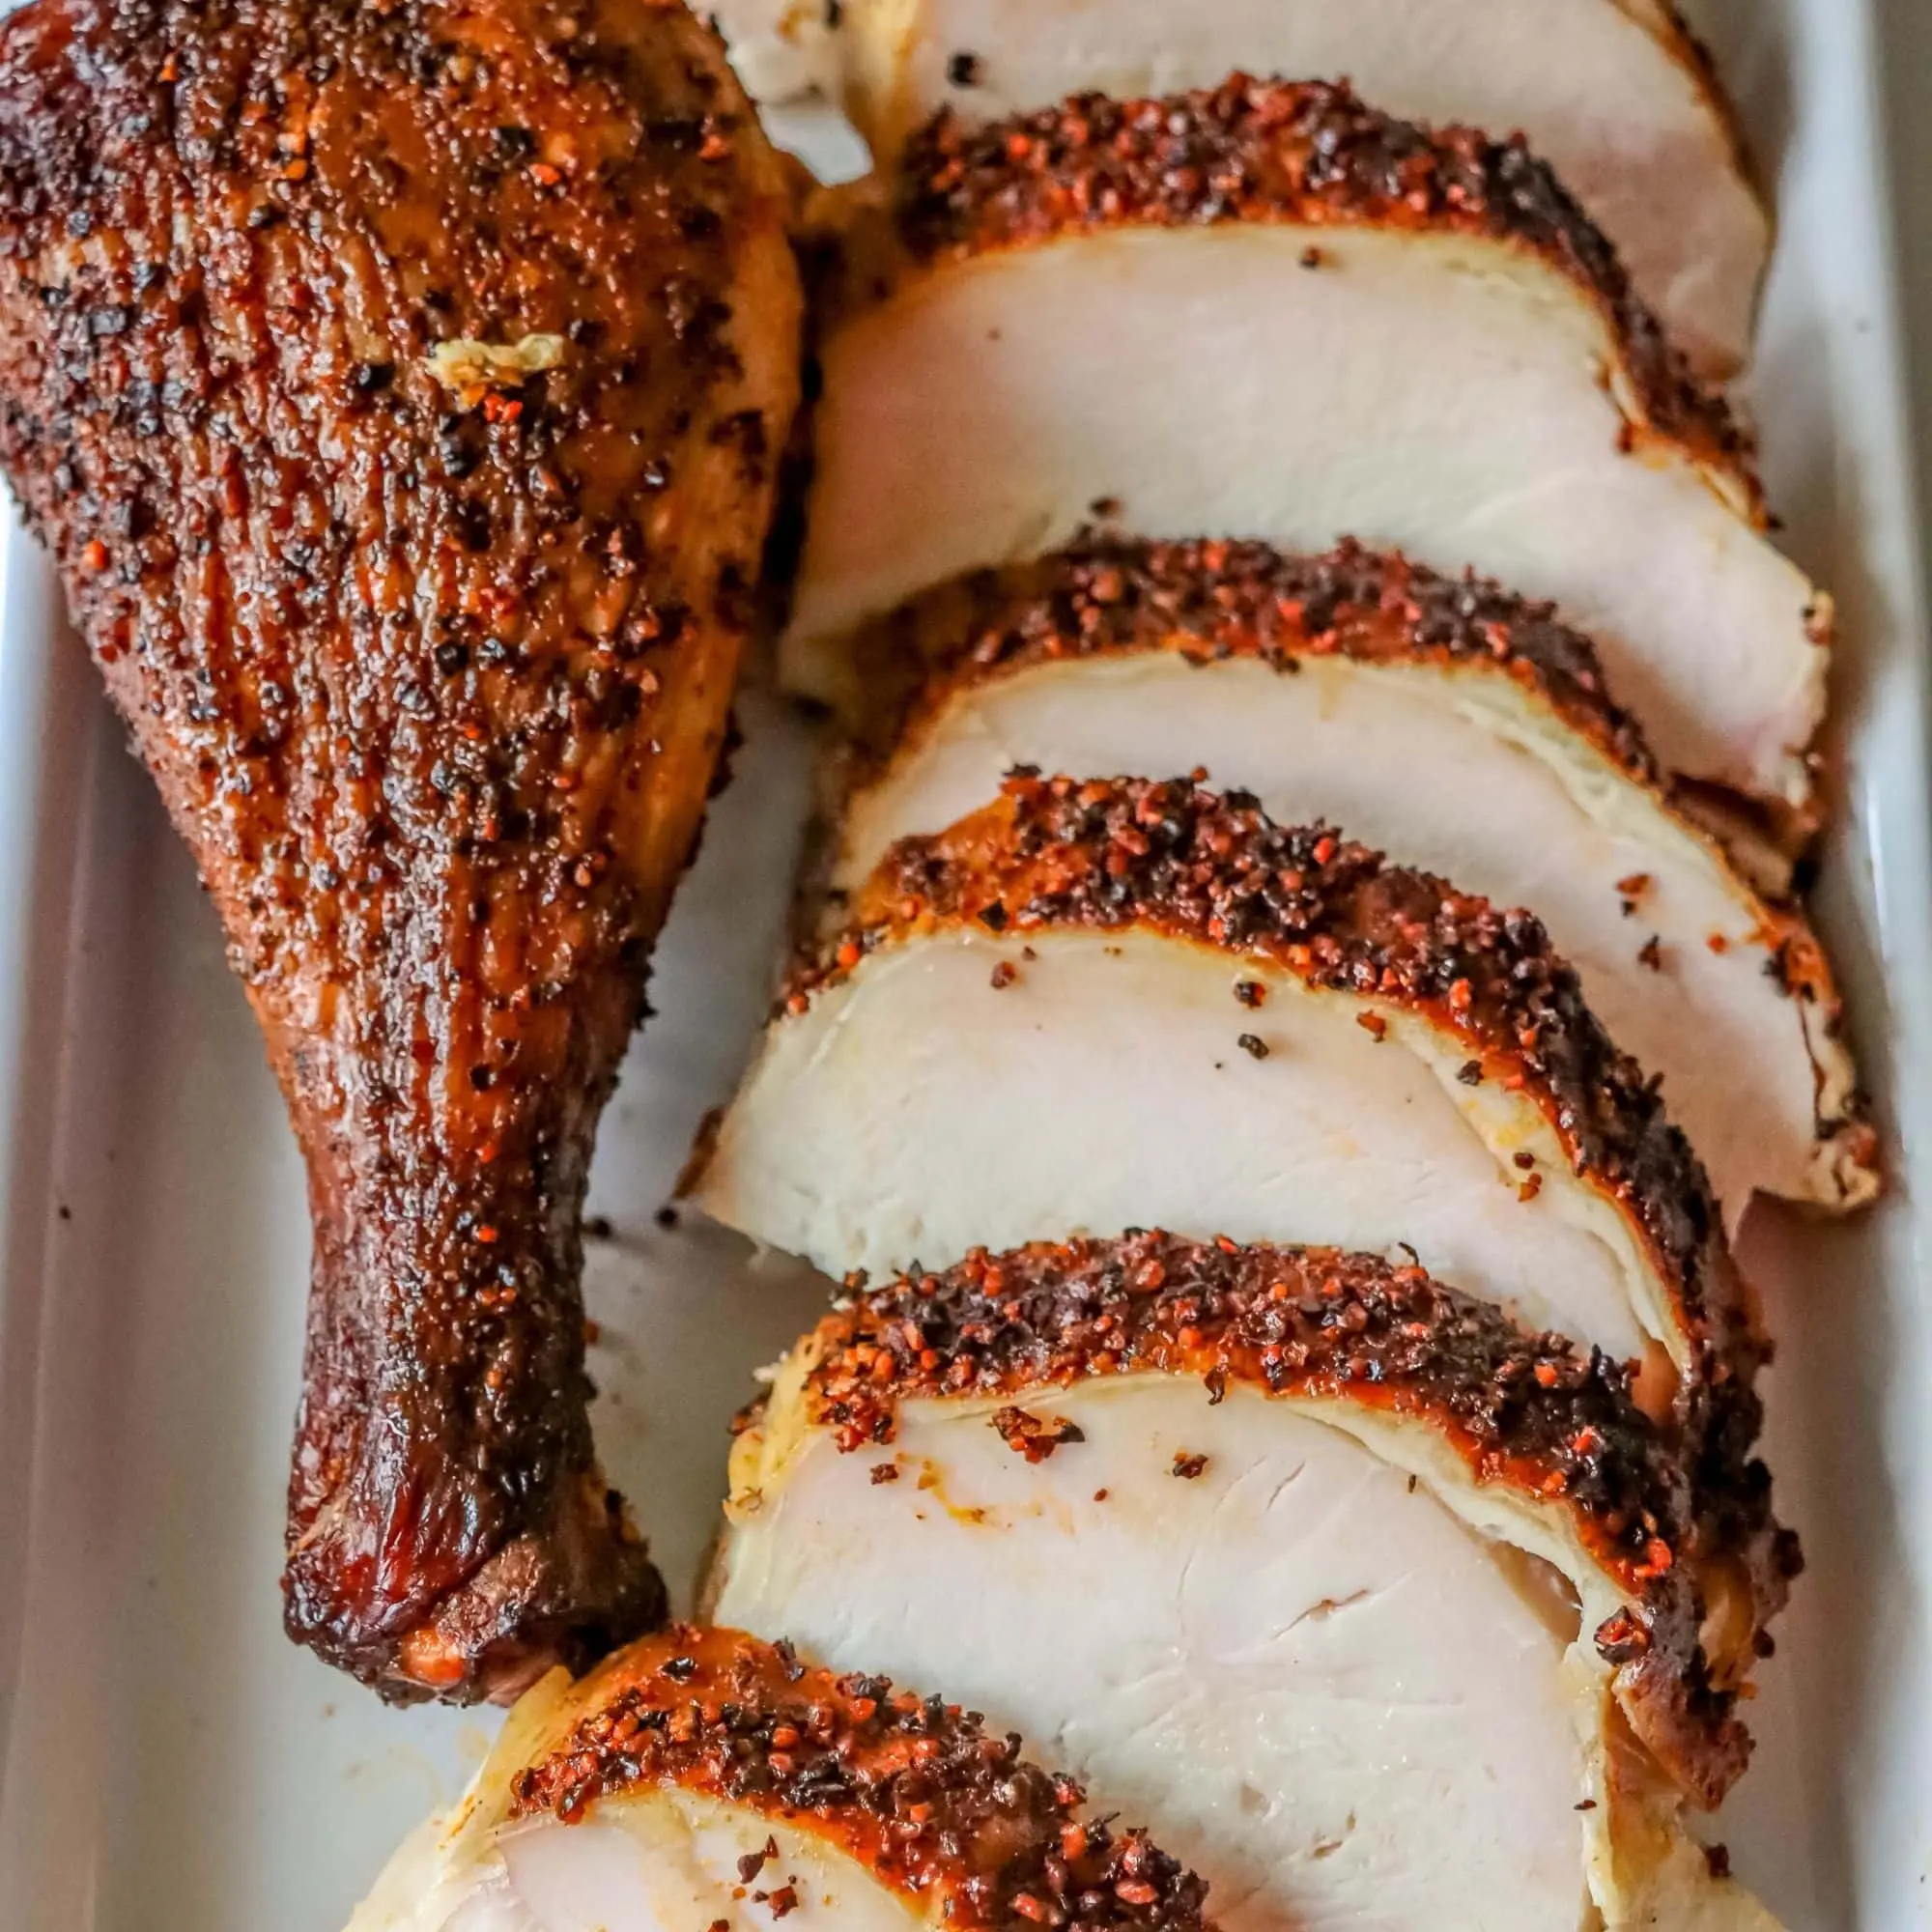 smoked chicken recipe - What is the secret to smoked chicken